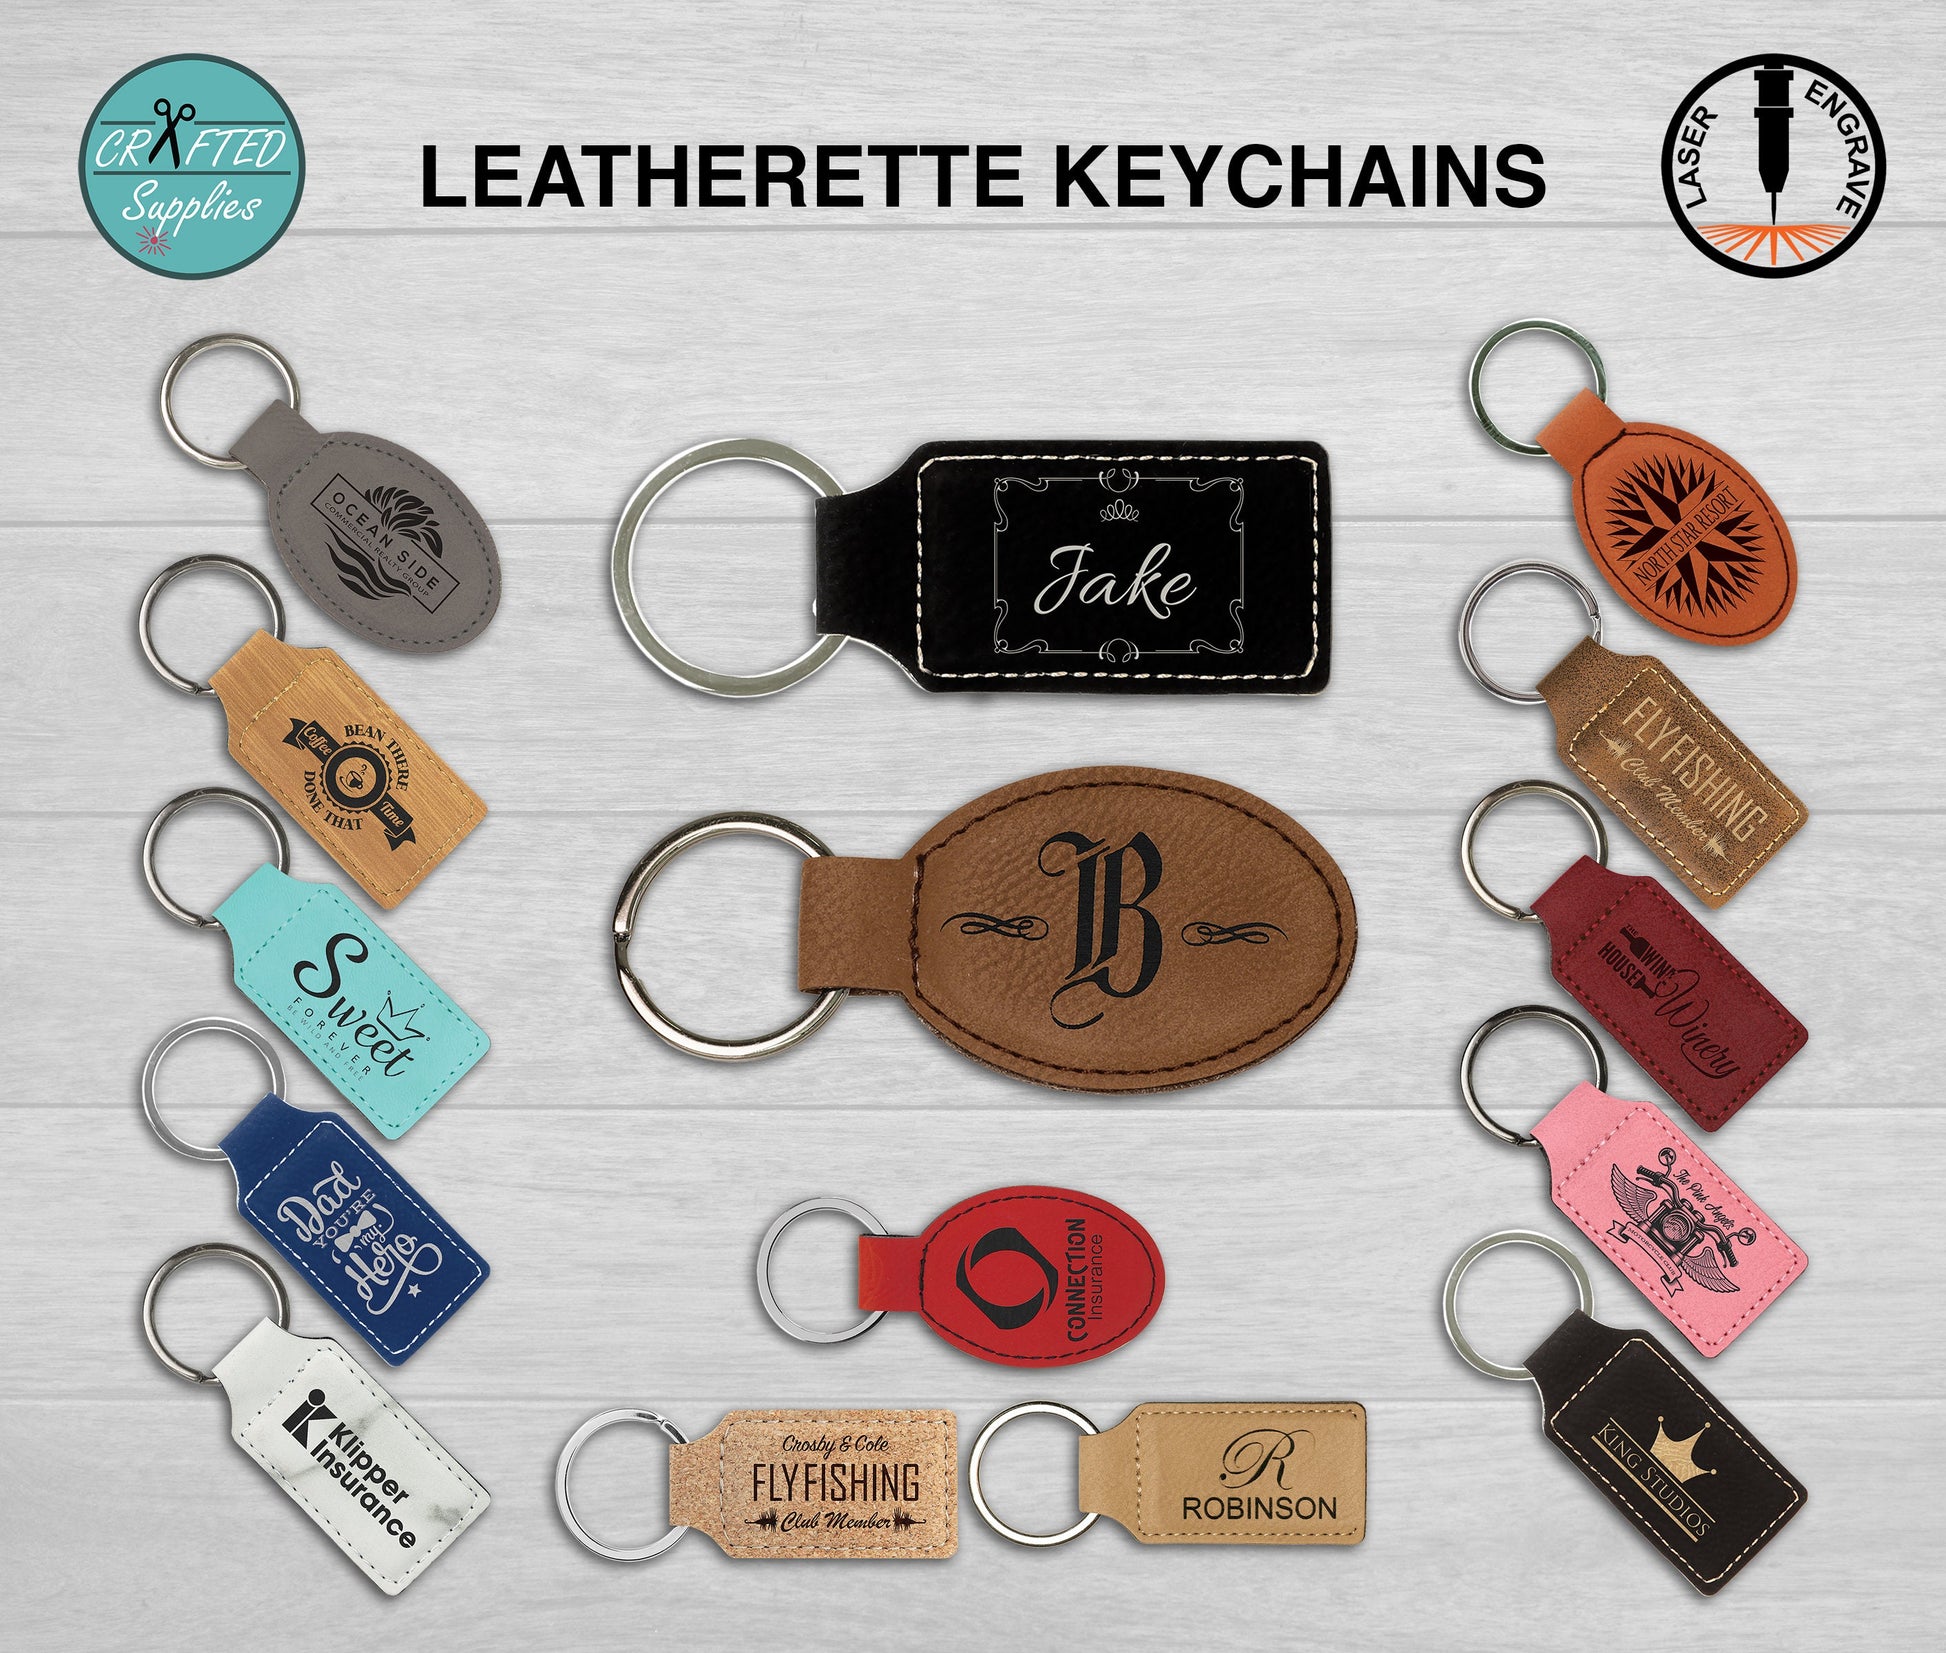 crafted supplies leatherette keychain